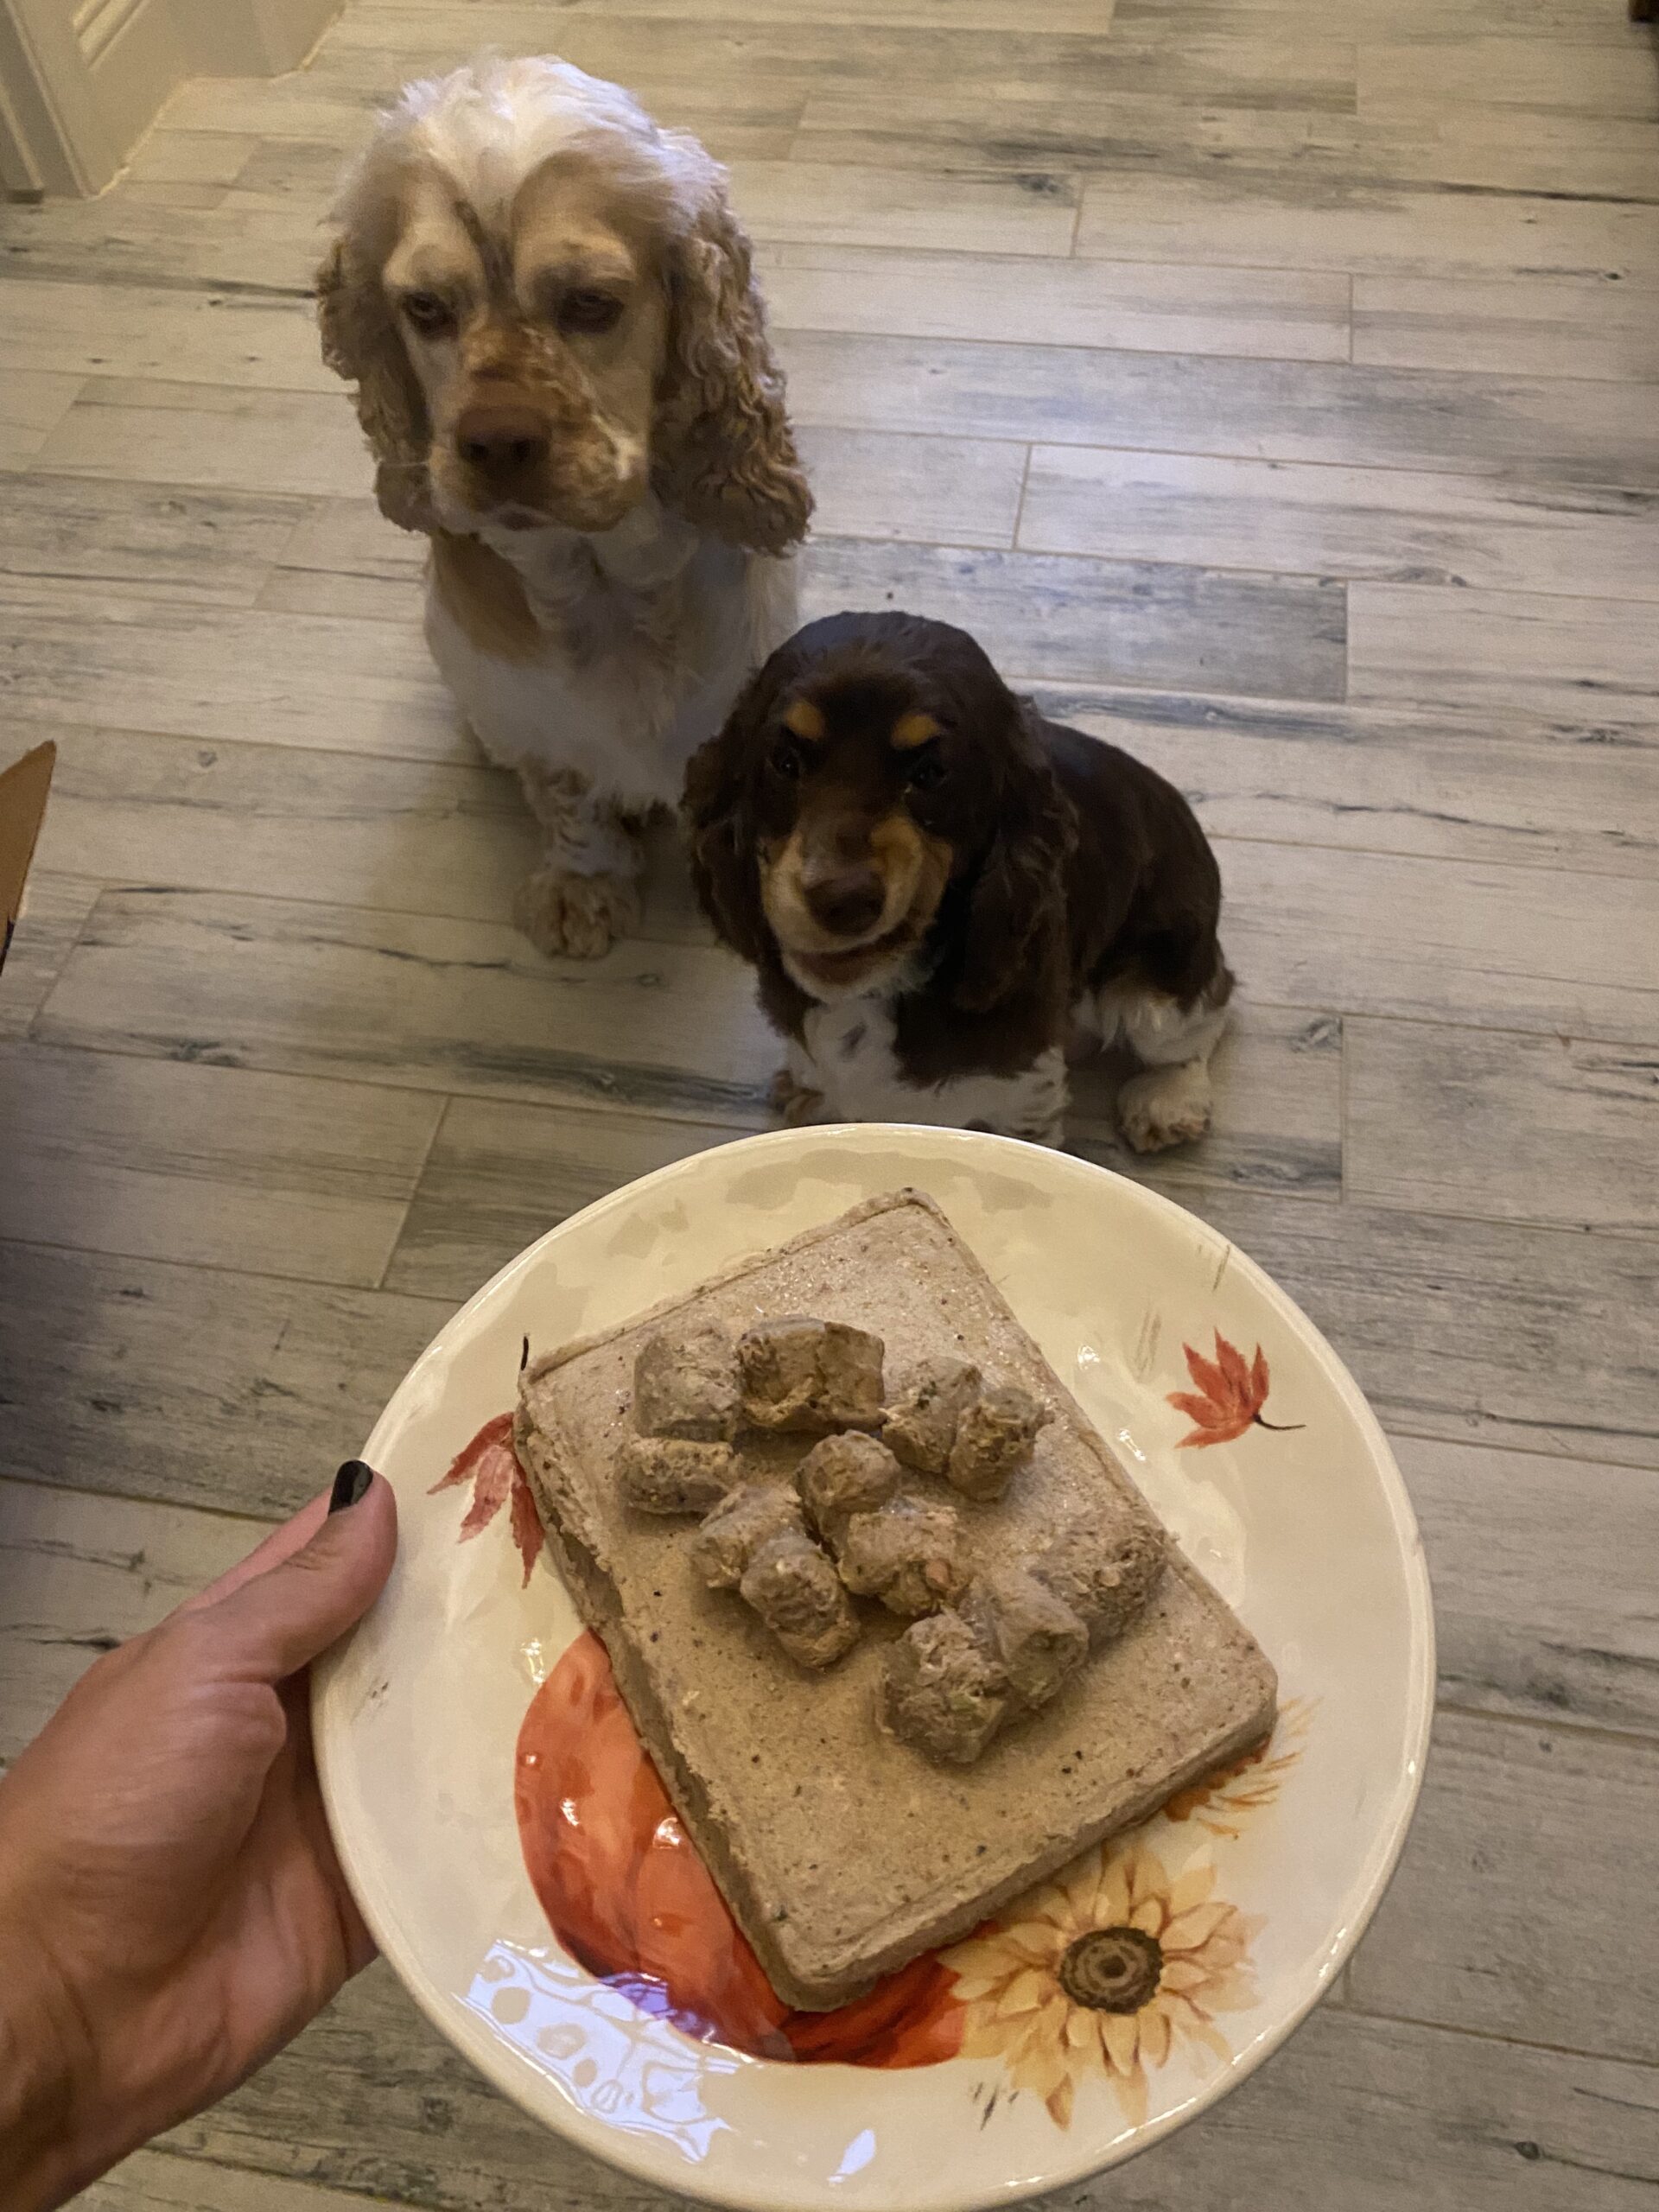 Two dogs waiting for a plate of food